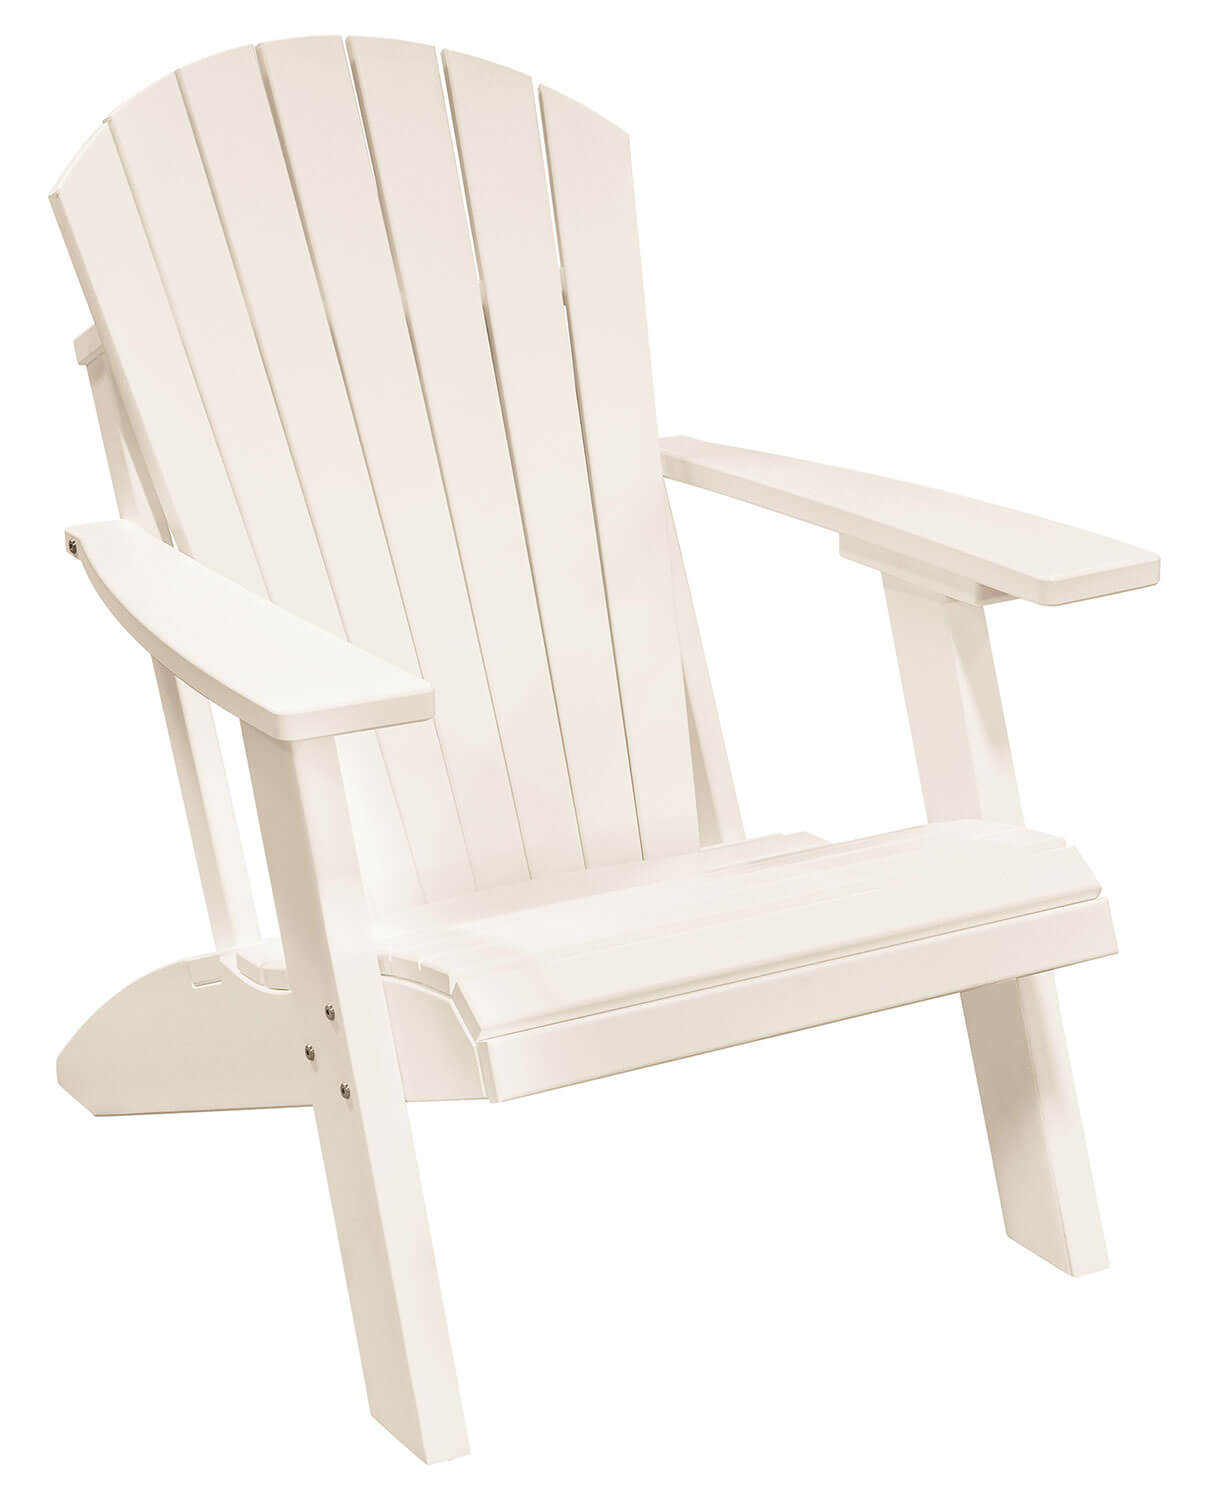 EC Woods Wilmington Adirondack Outdoor Poly Chair shown in Bright White